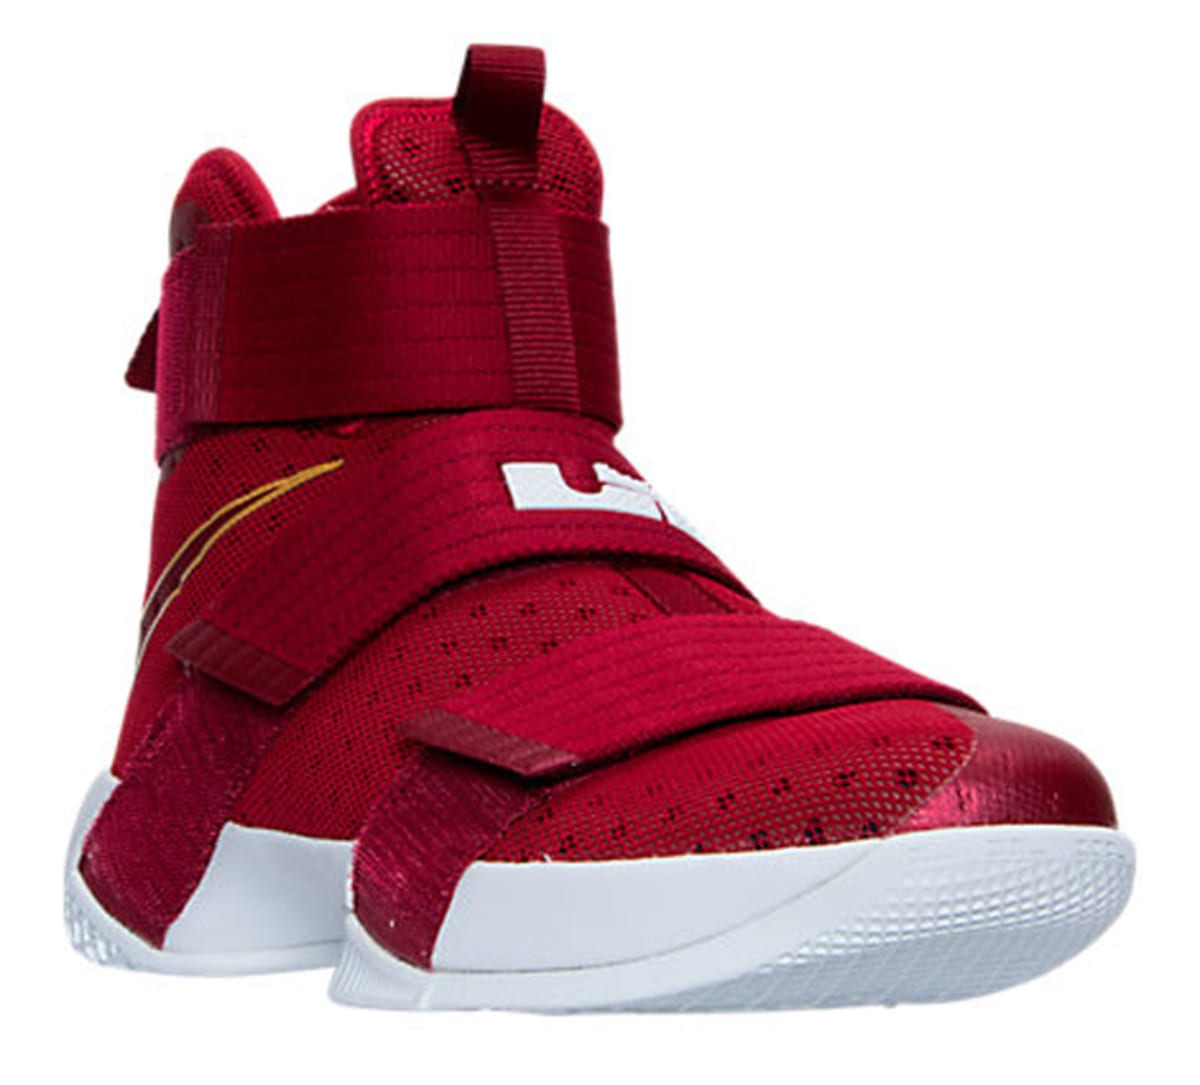 Nike LeBron Soldier 10 Christ the King Cavs Team Red Side 844374-668 | Sole Collector1200 x 1085